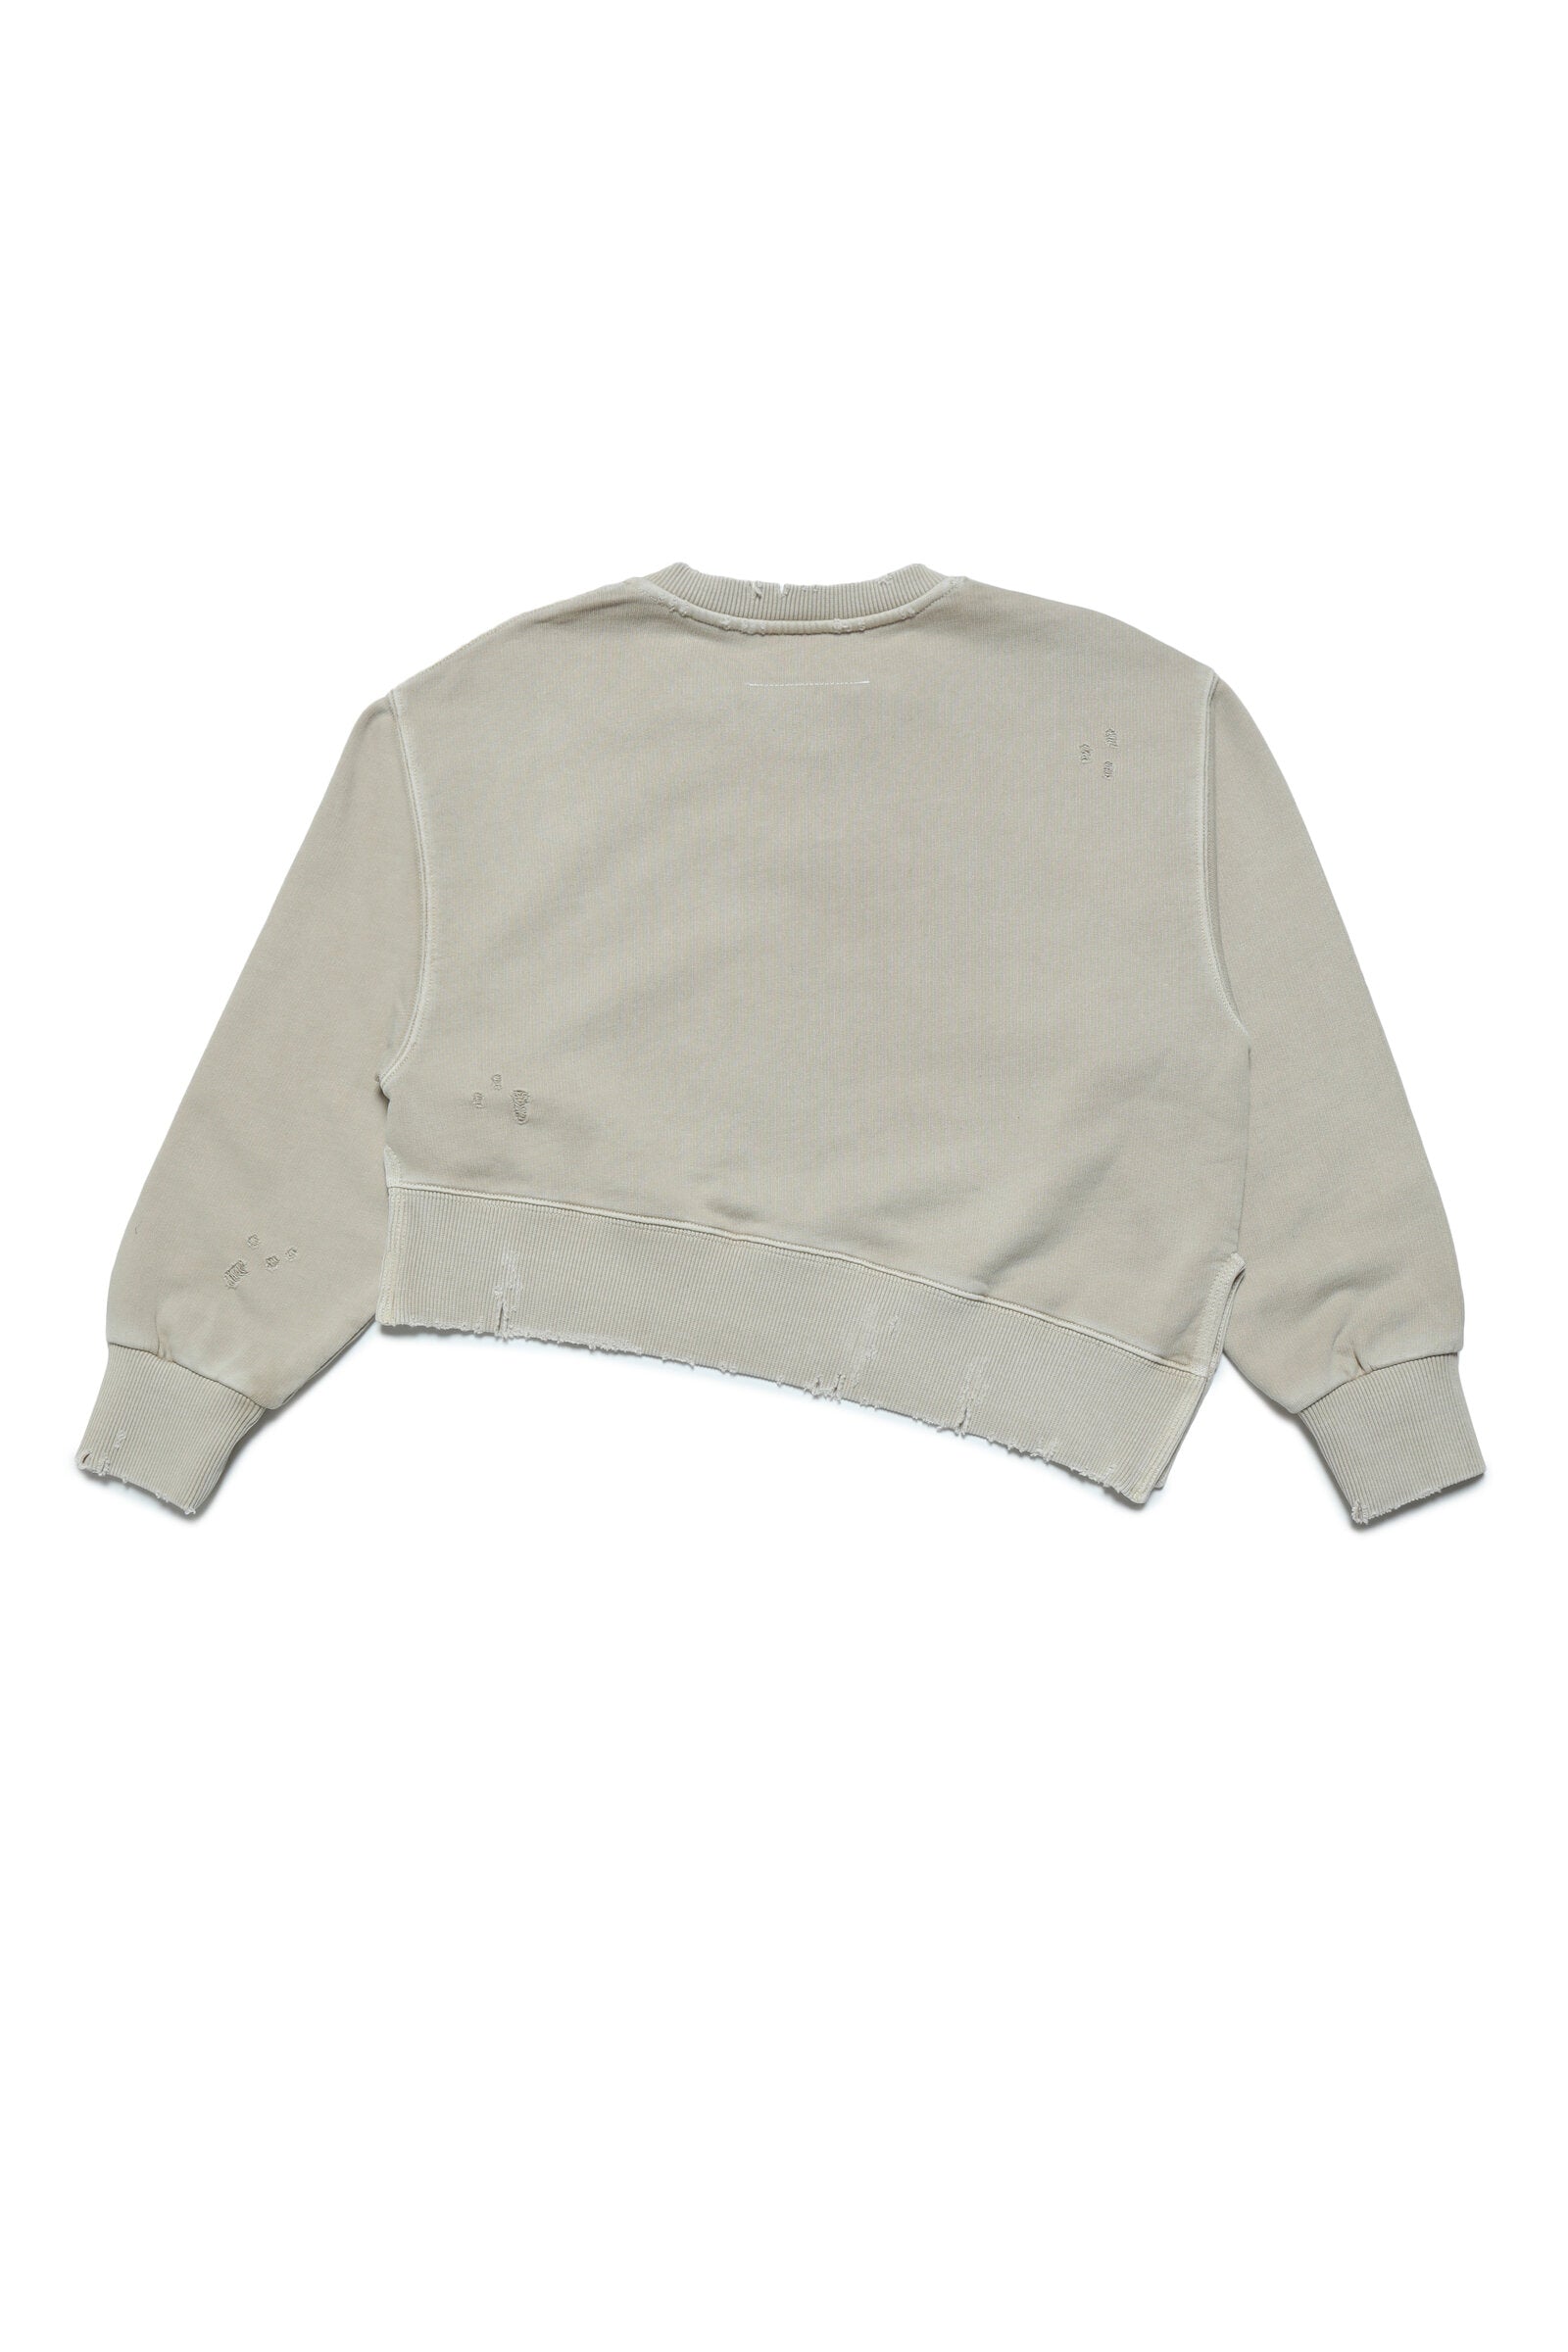 Cotton crew-neck cropped sweatshirt with logo and breaks